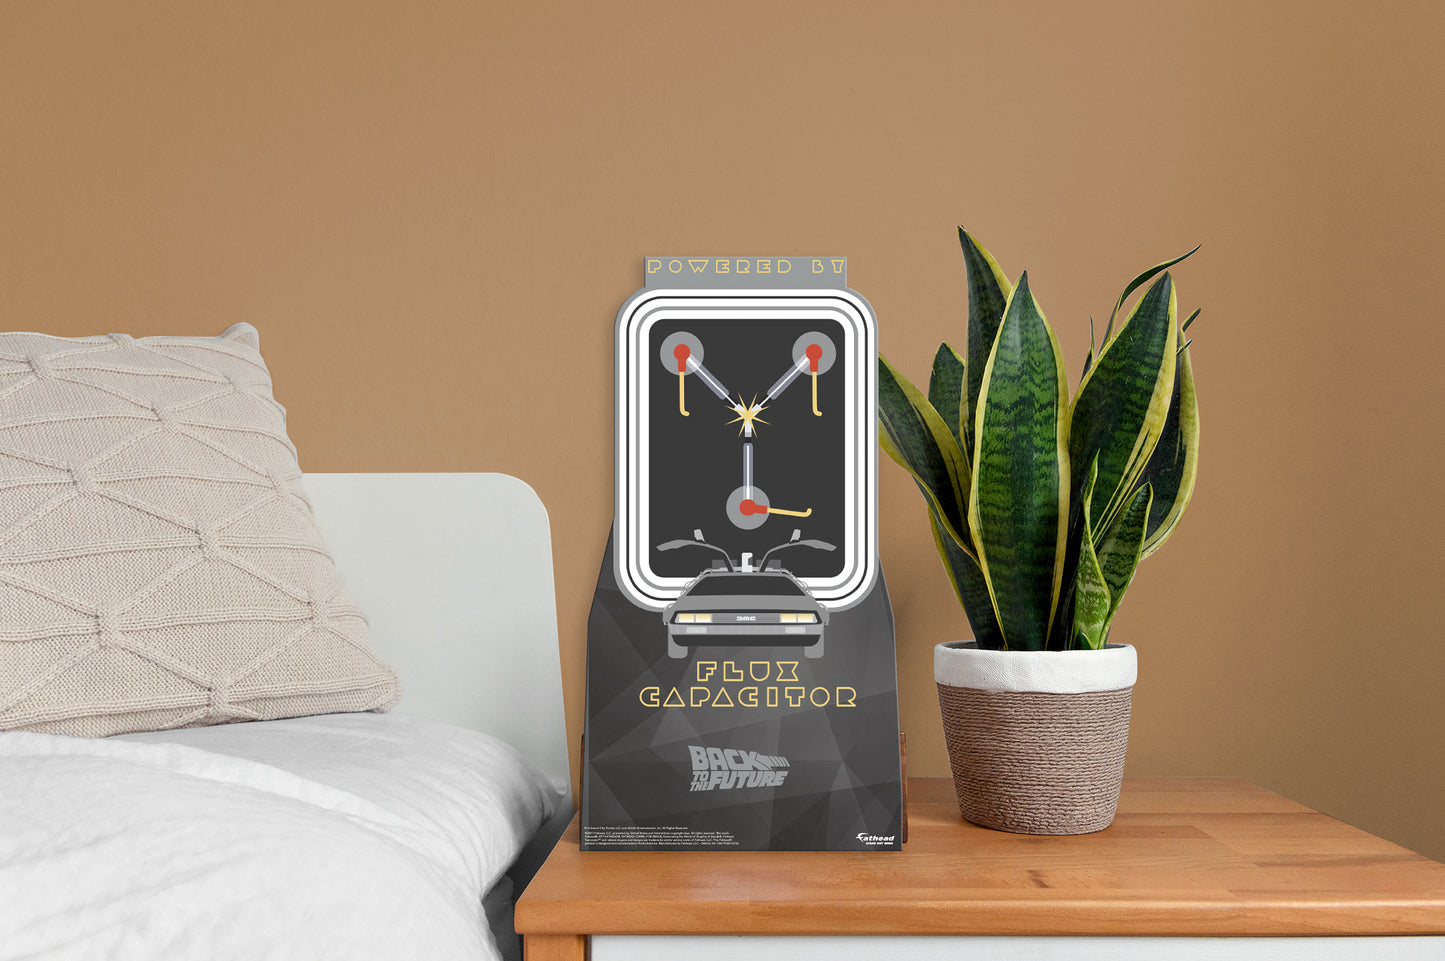 Back to the Future: Flux Capacitor Mini Cardstock Cutout - Officially Licensed NBC Universal Stand Out